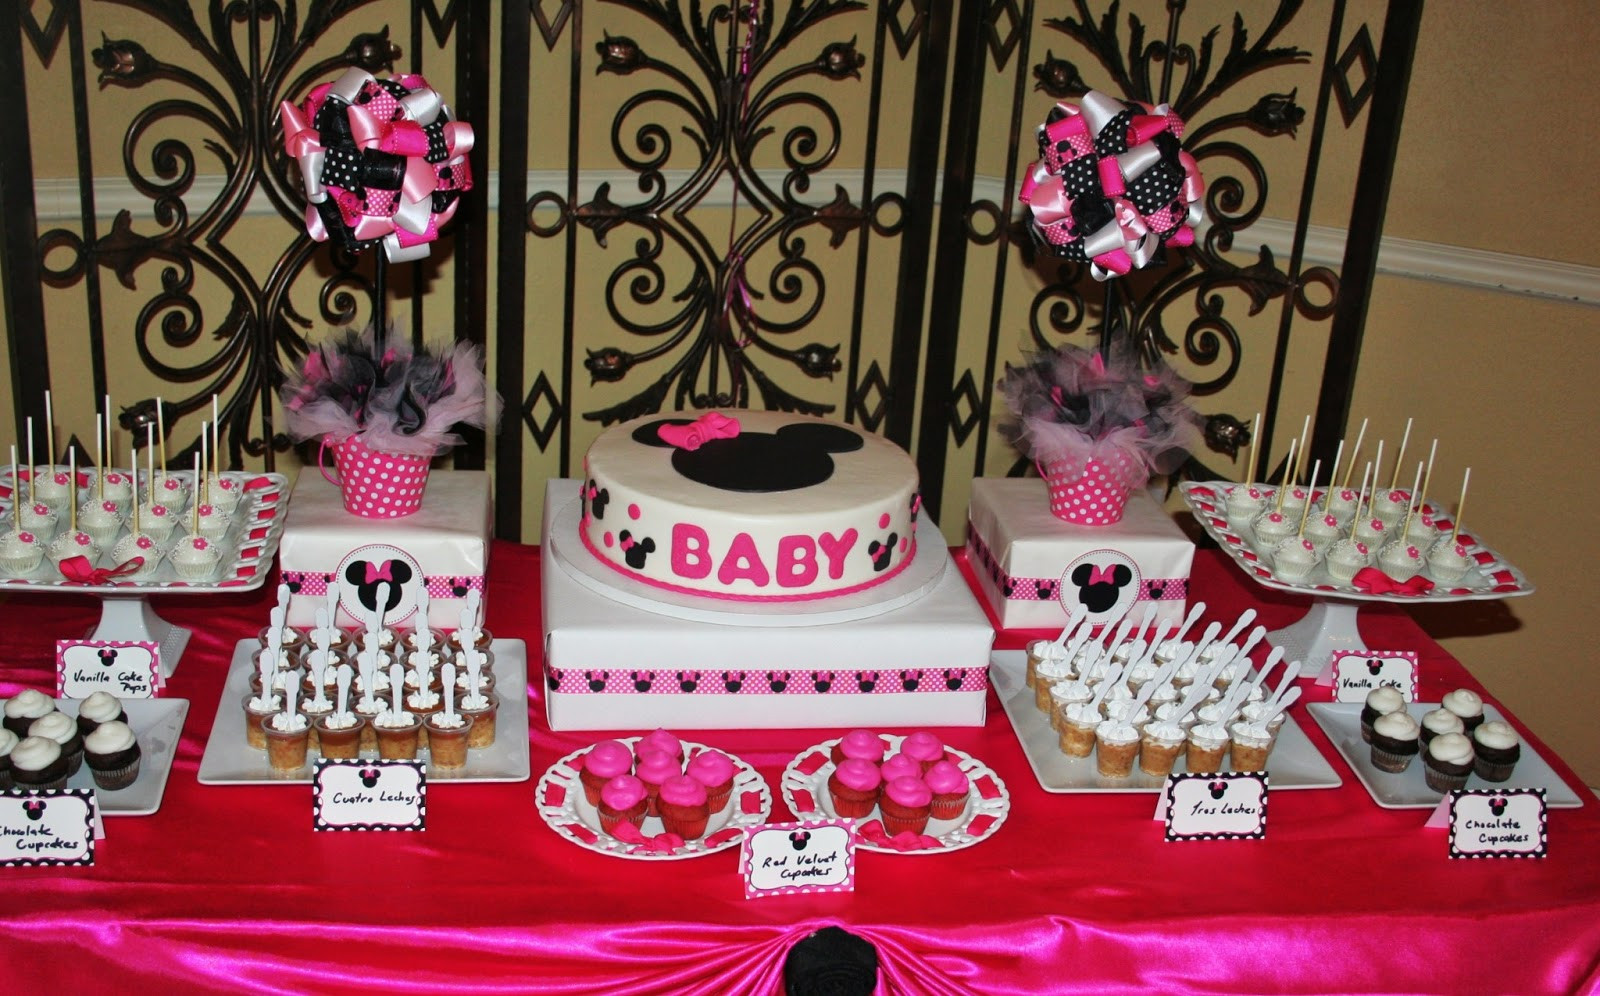 Party City Minnie Mouse Baby Shower
 SWEET TREATS CAROUSEL Beautiful Minnie Mouse Baby Shower